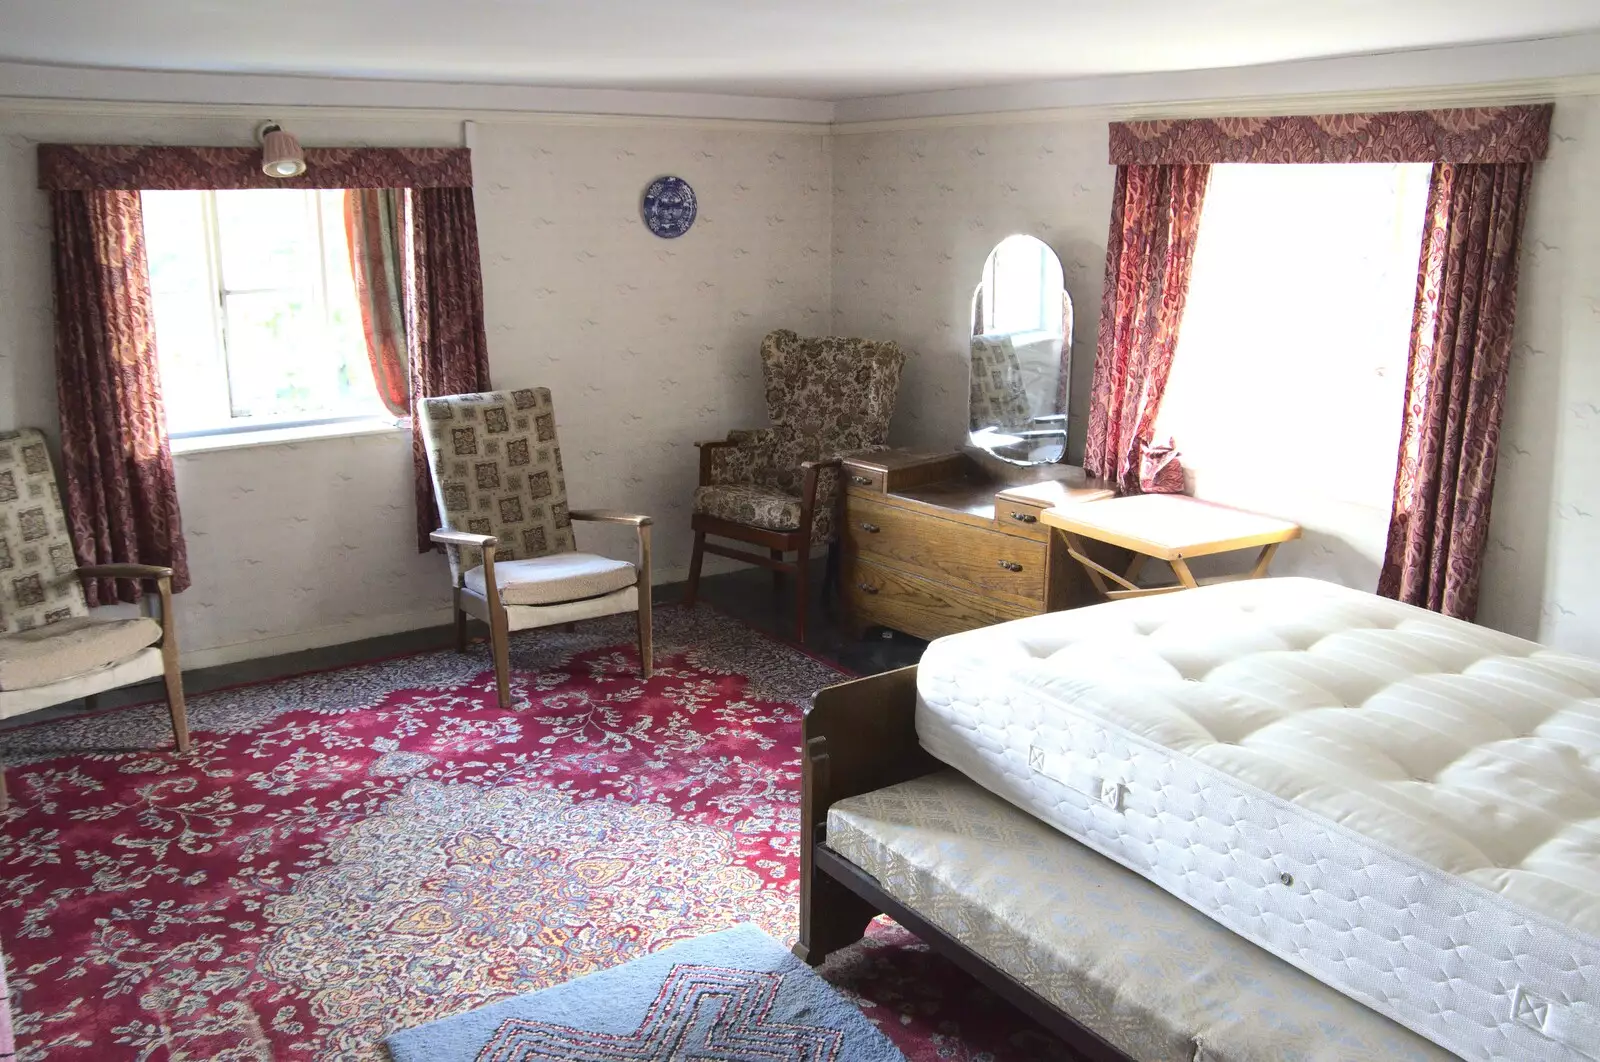 A guest bedroom with more 30s and 40s furniture, from A 1940s Timewarp, Site 4, Bungay Airfield, Flixton, Suffolk - 9th June 2022